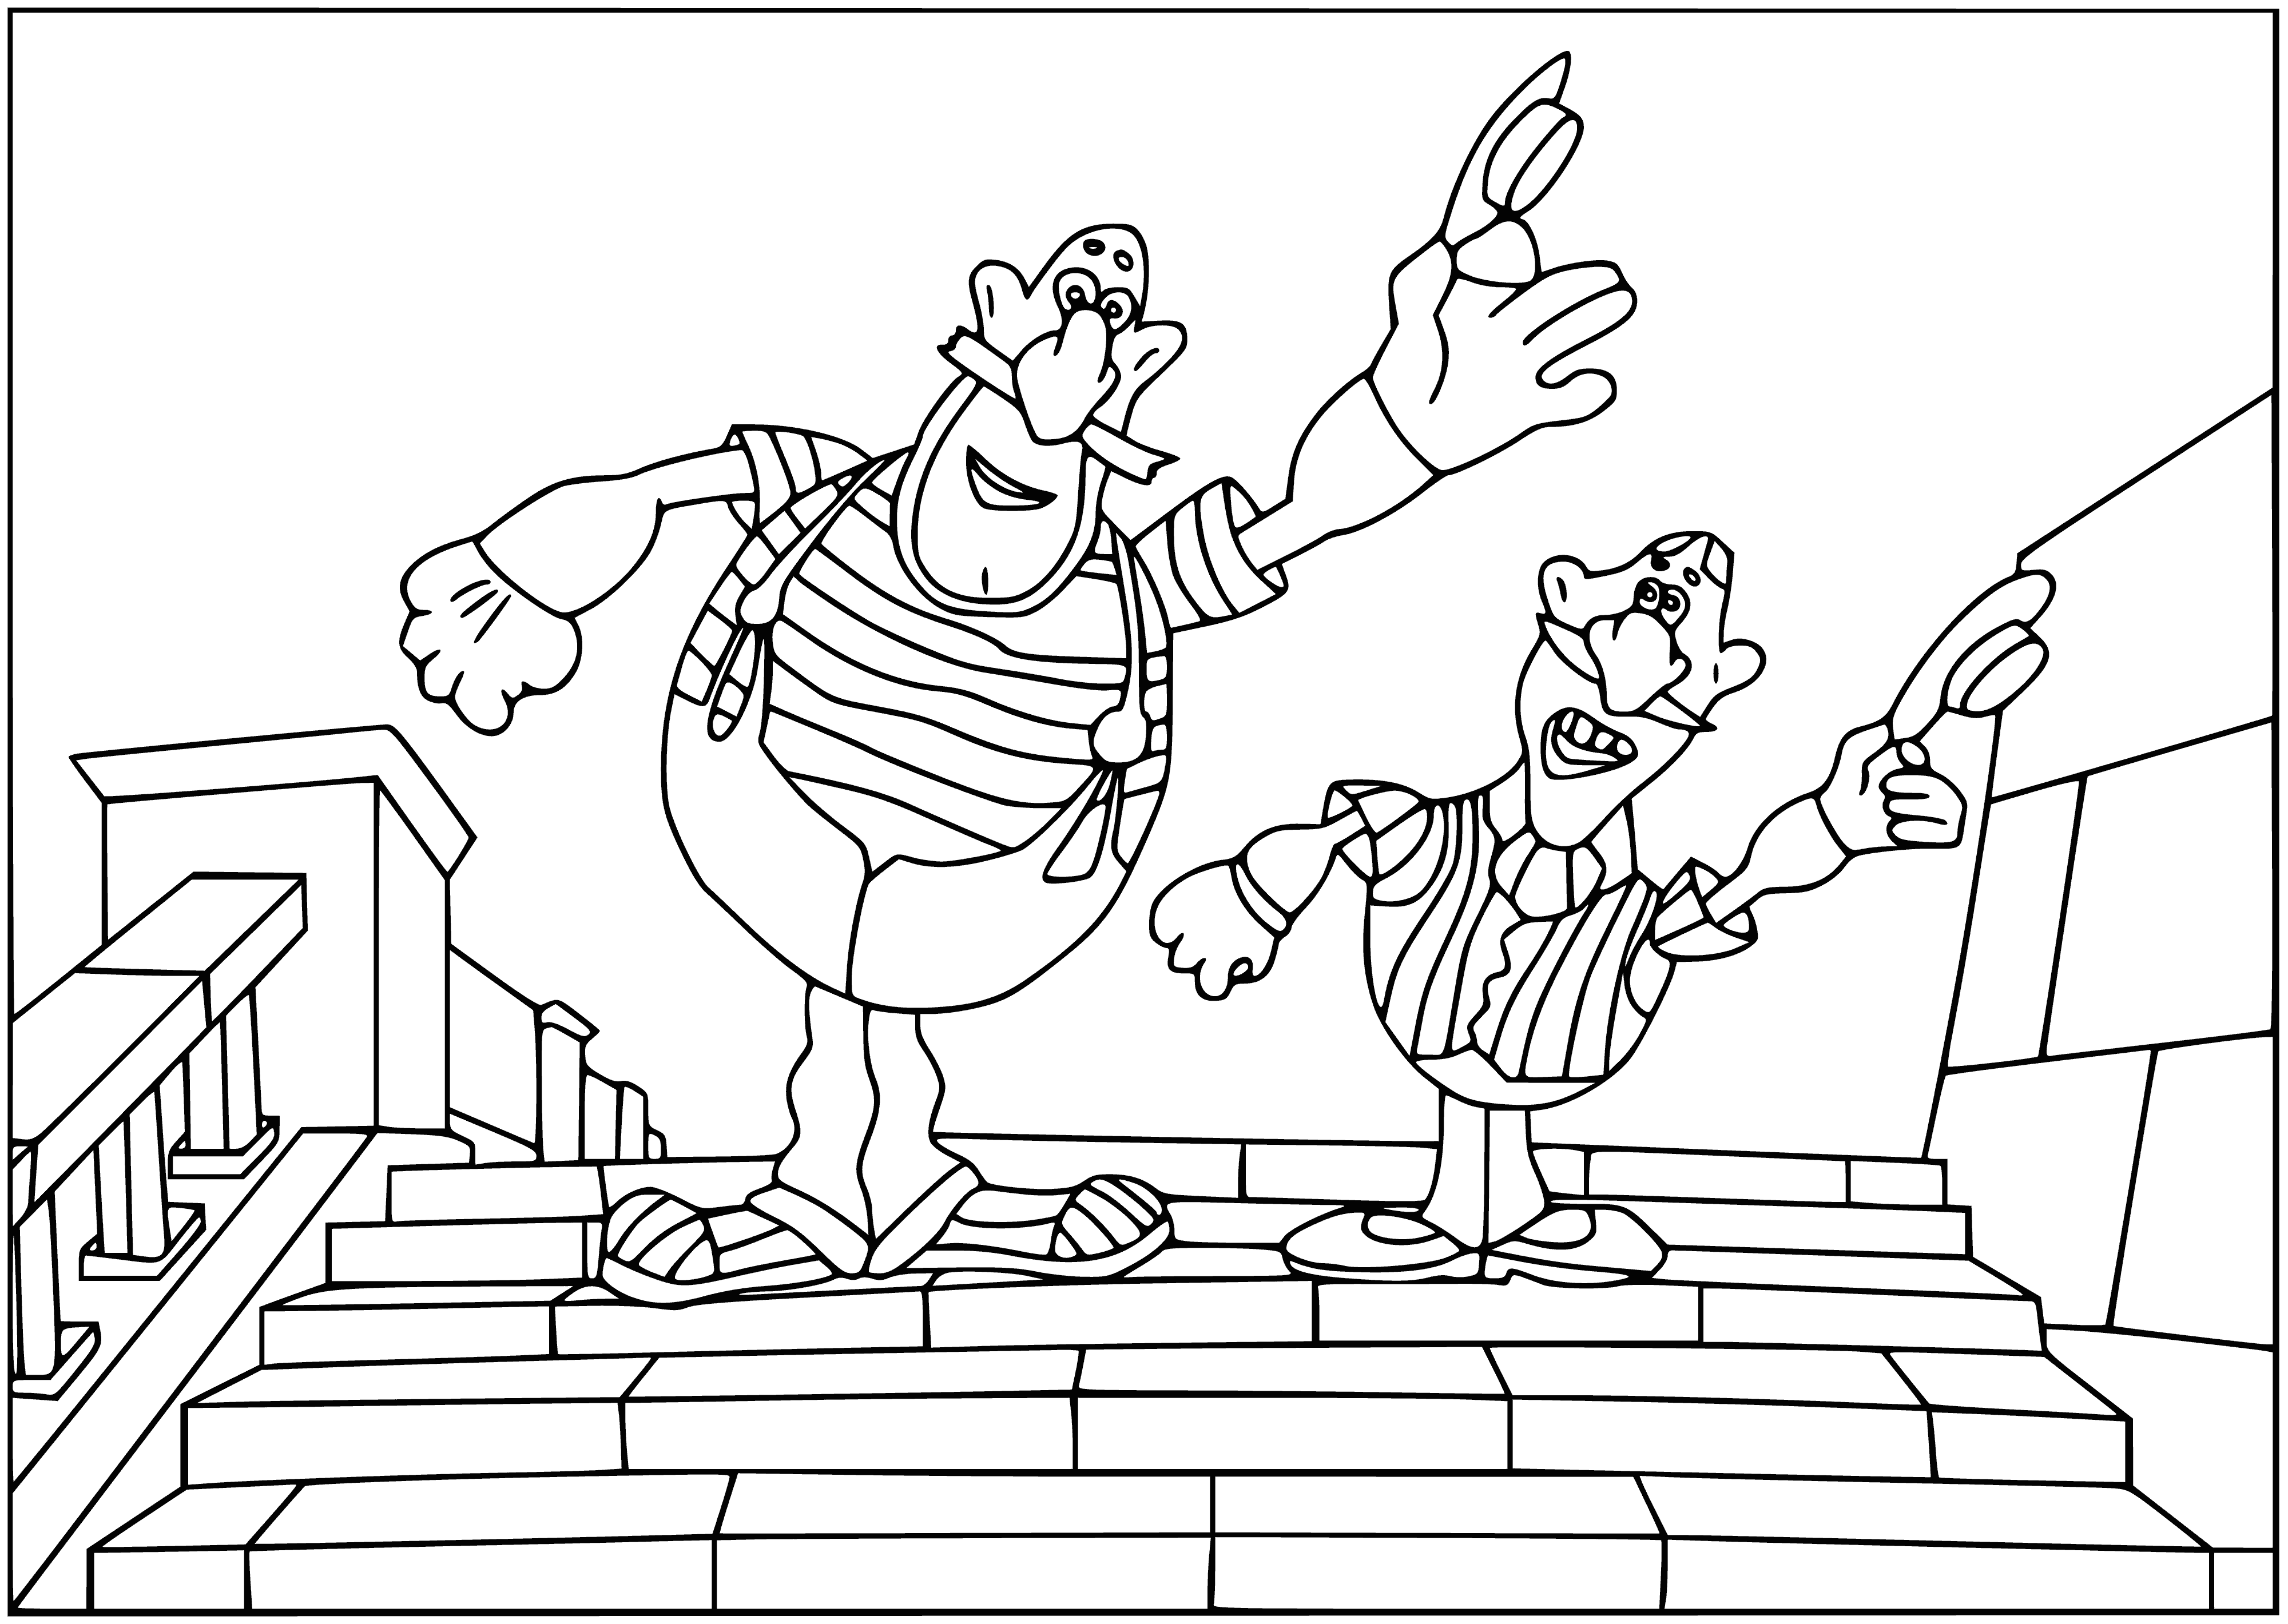 coloring page: Four intimidating men with guns. One smoking a cigarette, one with cigar in his mouth, two with machine guns pointed out the window.